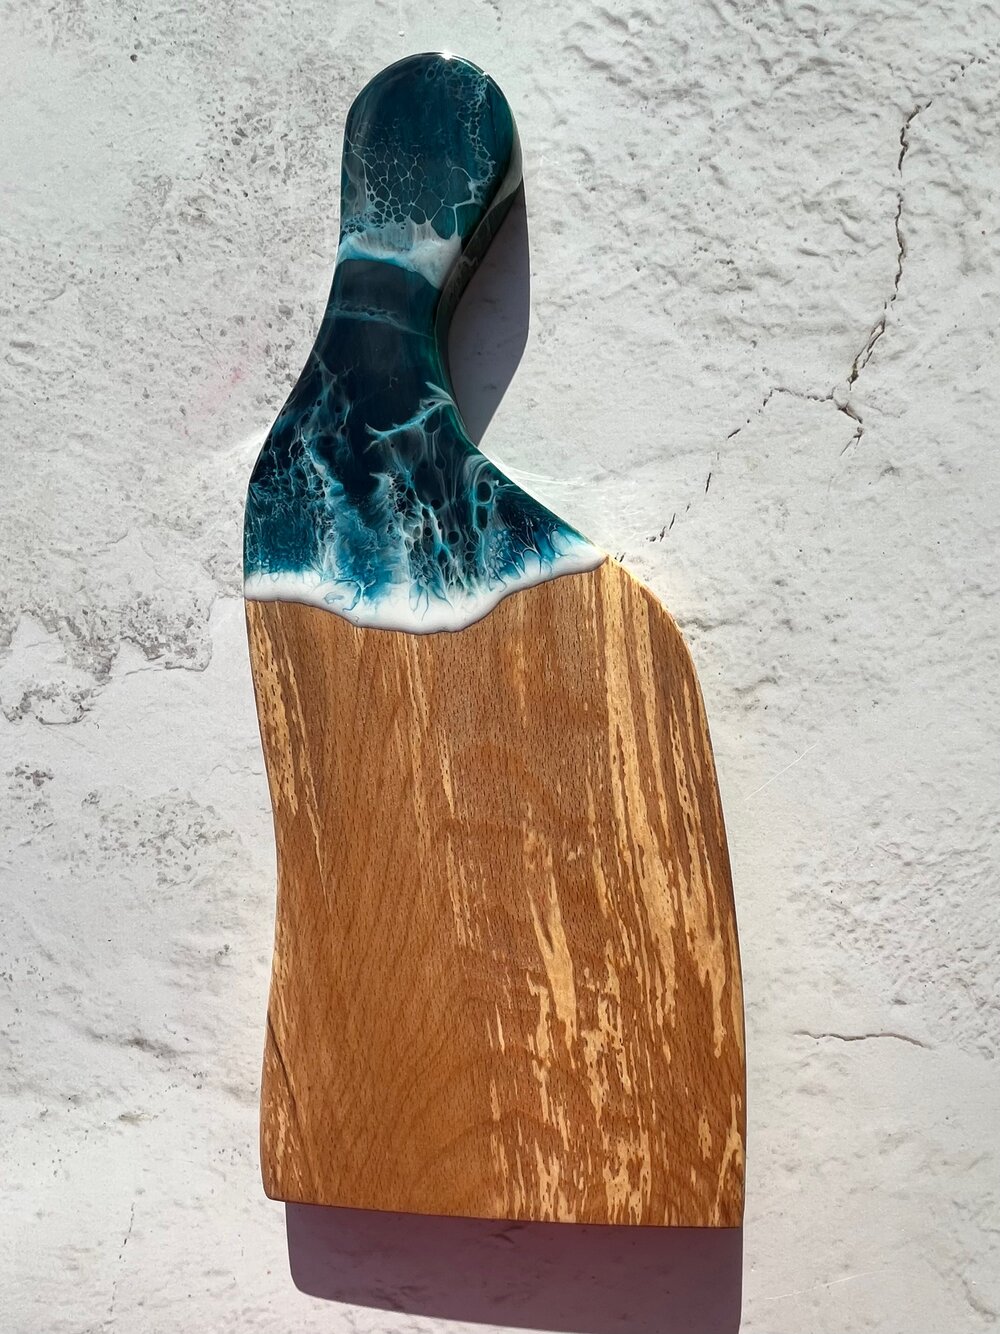 Fish Shaped Teak and Resin Cheese/Cutting Board FS112